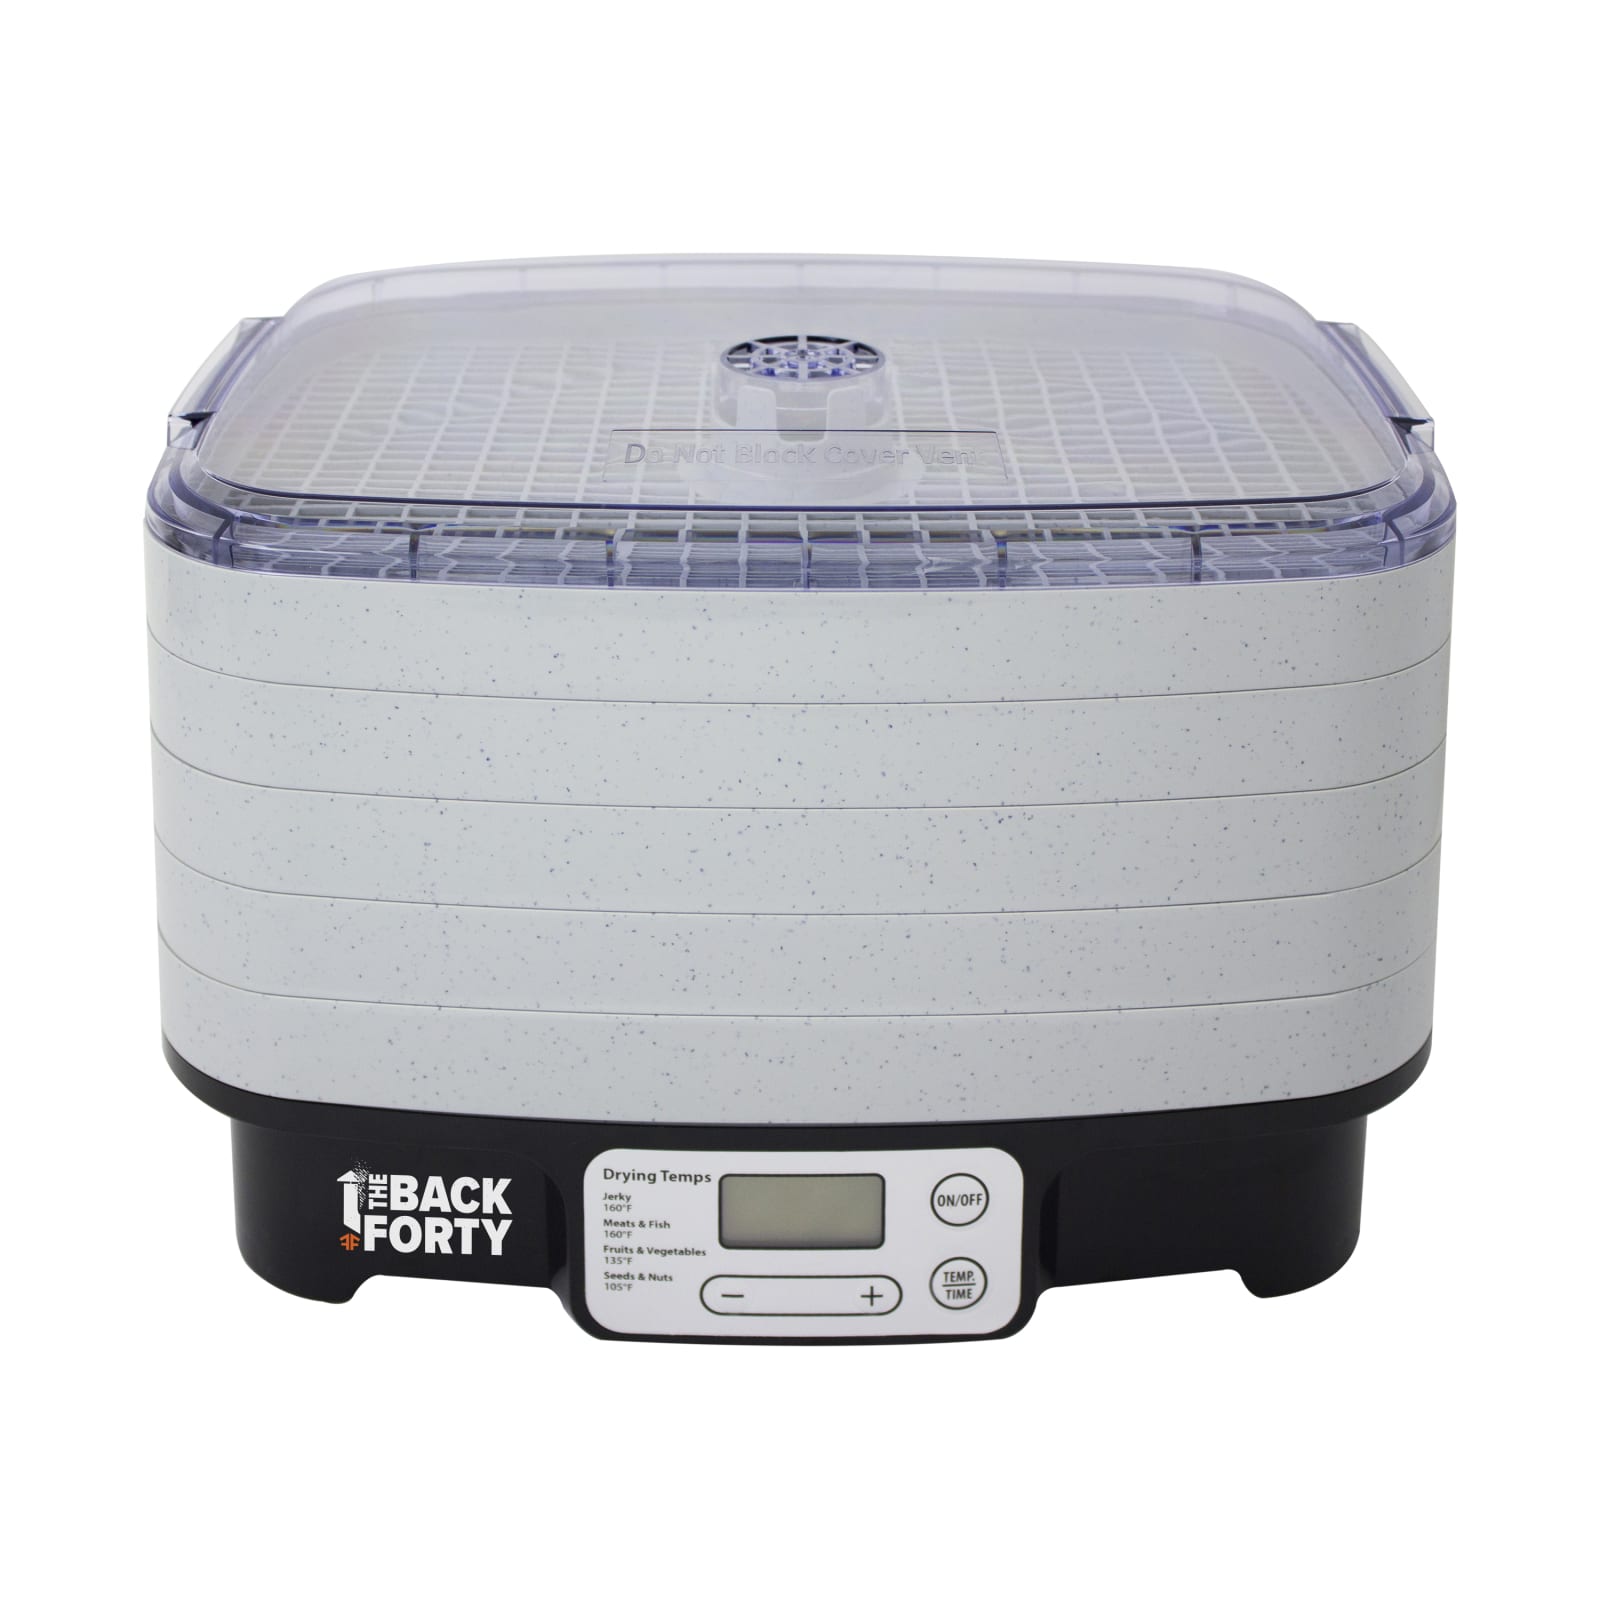 It's 2015. Where Is the Black & Decker Food Hydrator from Back to